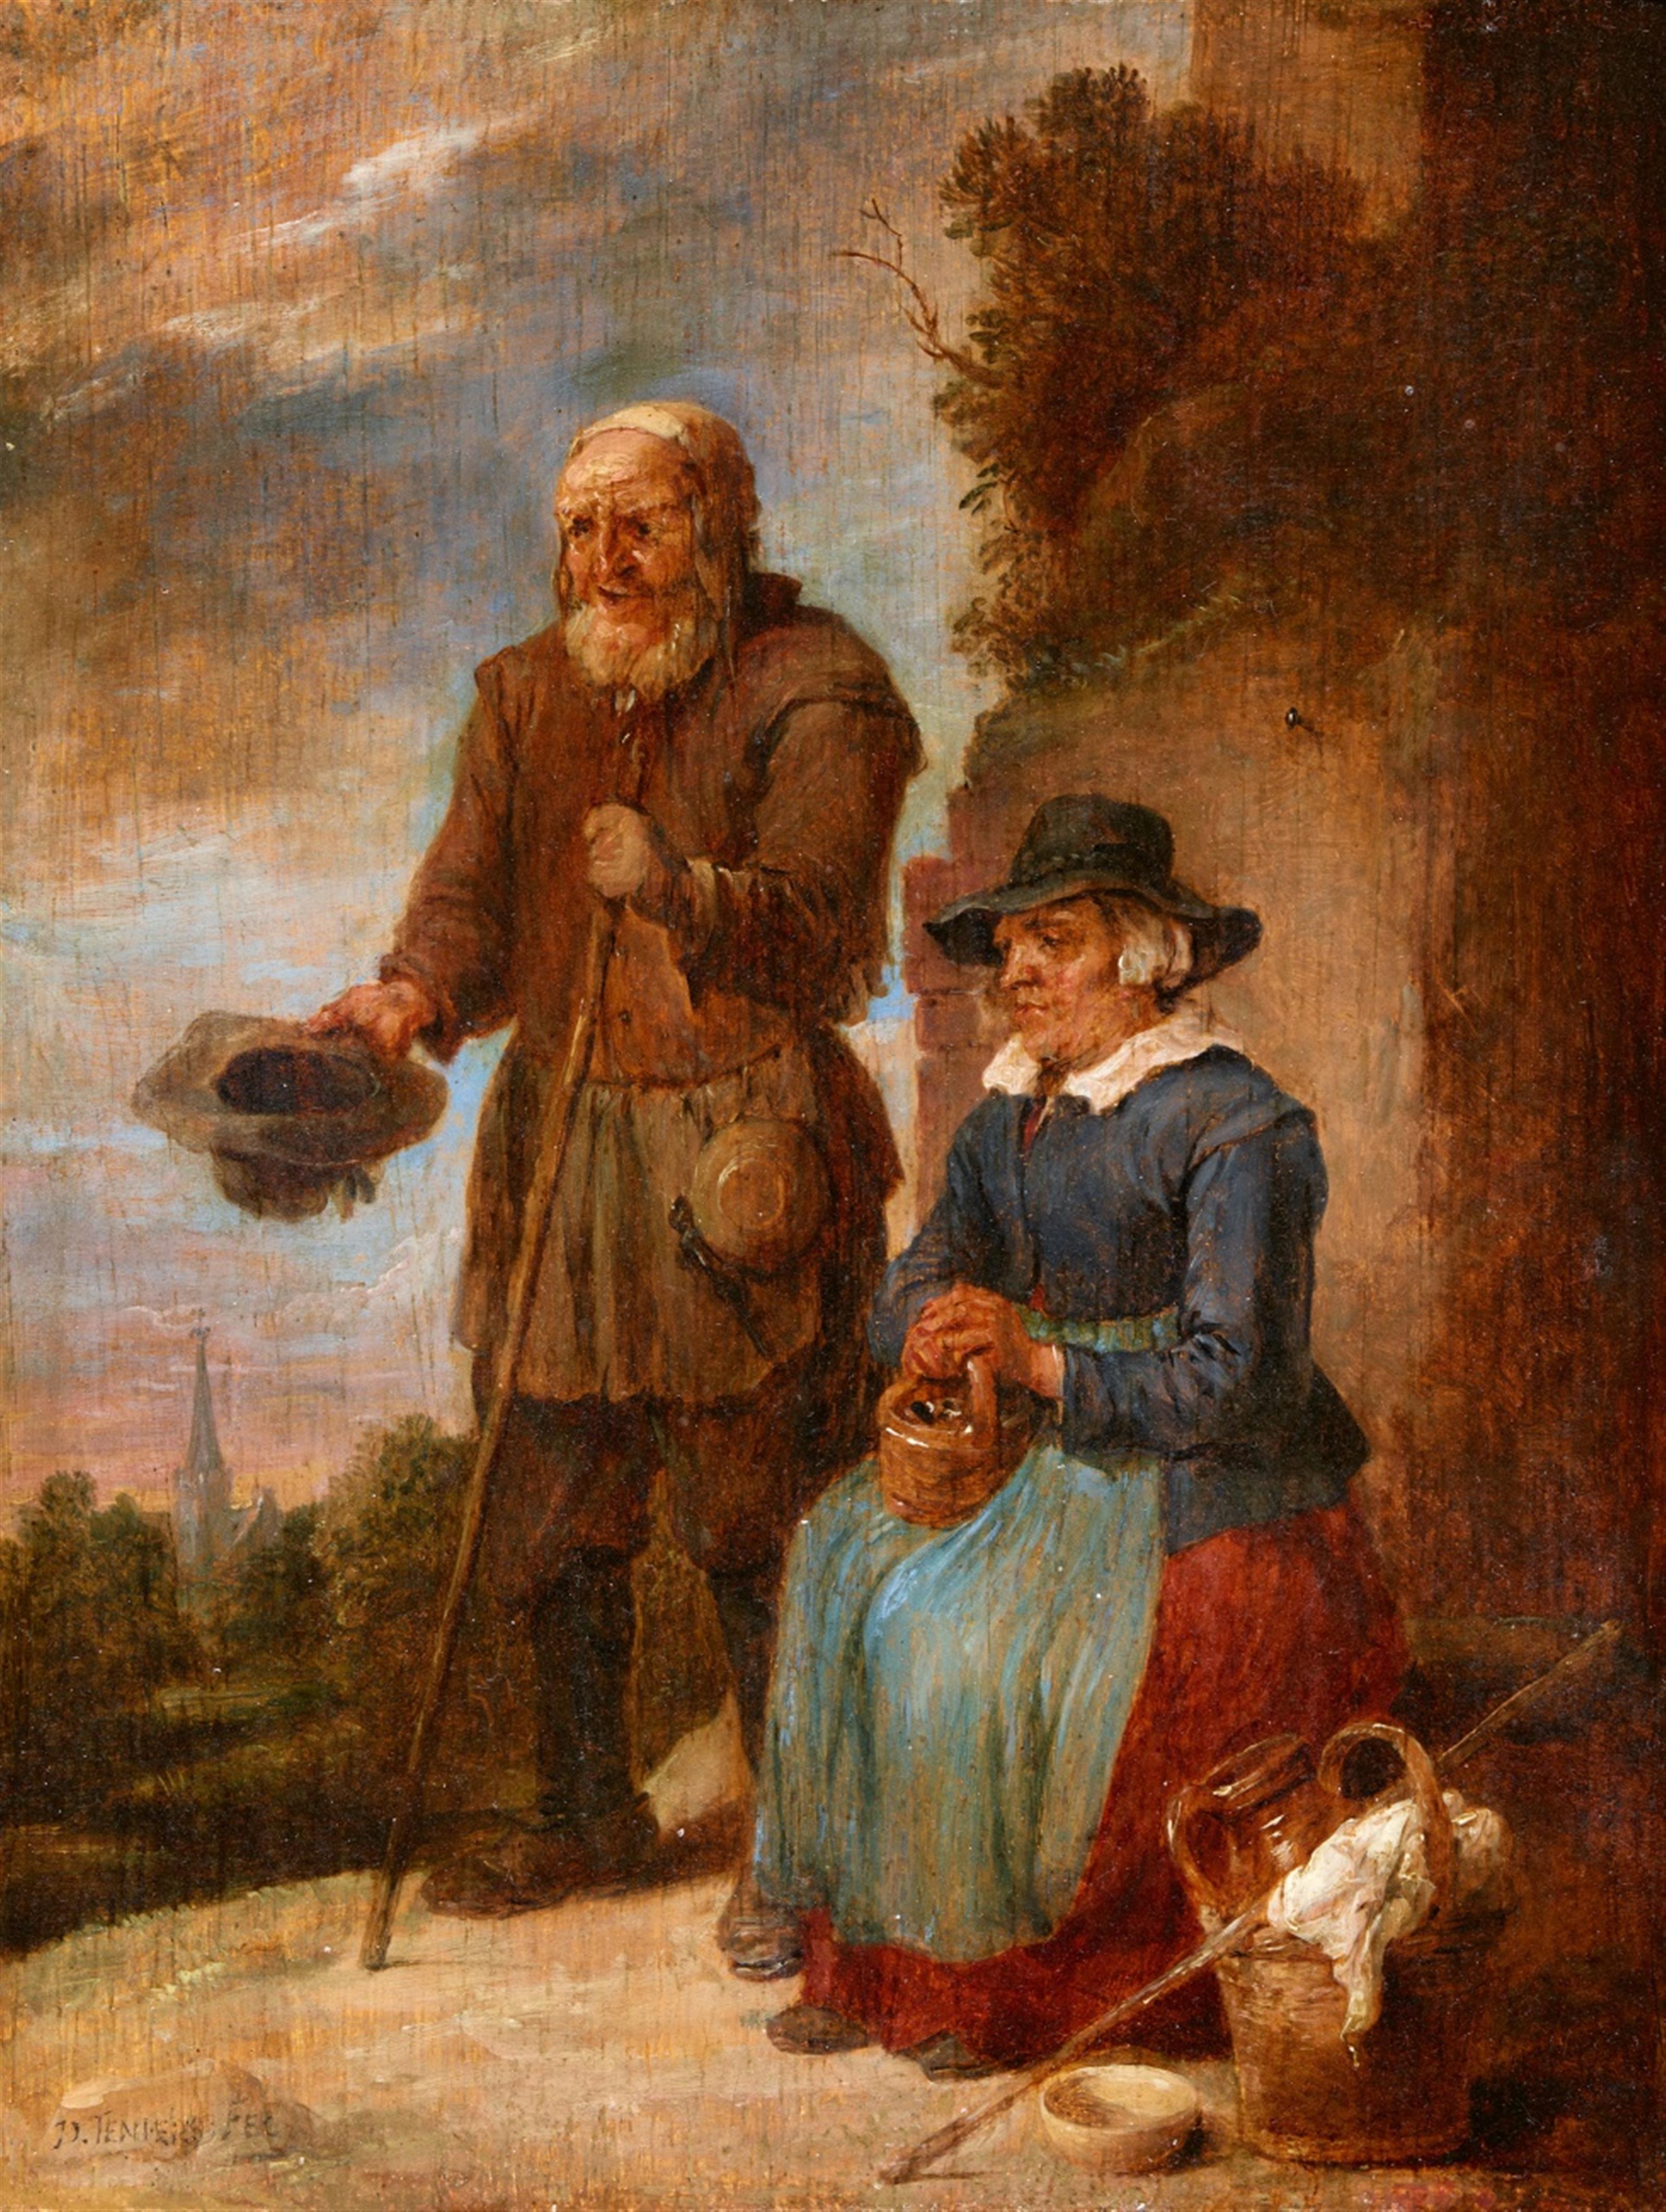 David Teniers the Younger - A Beggar Couple - image-1